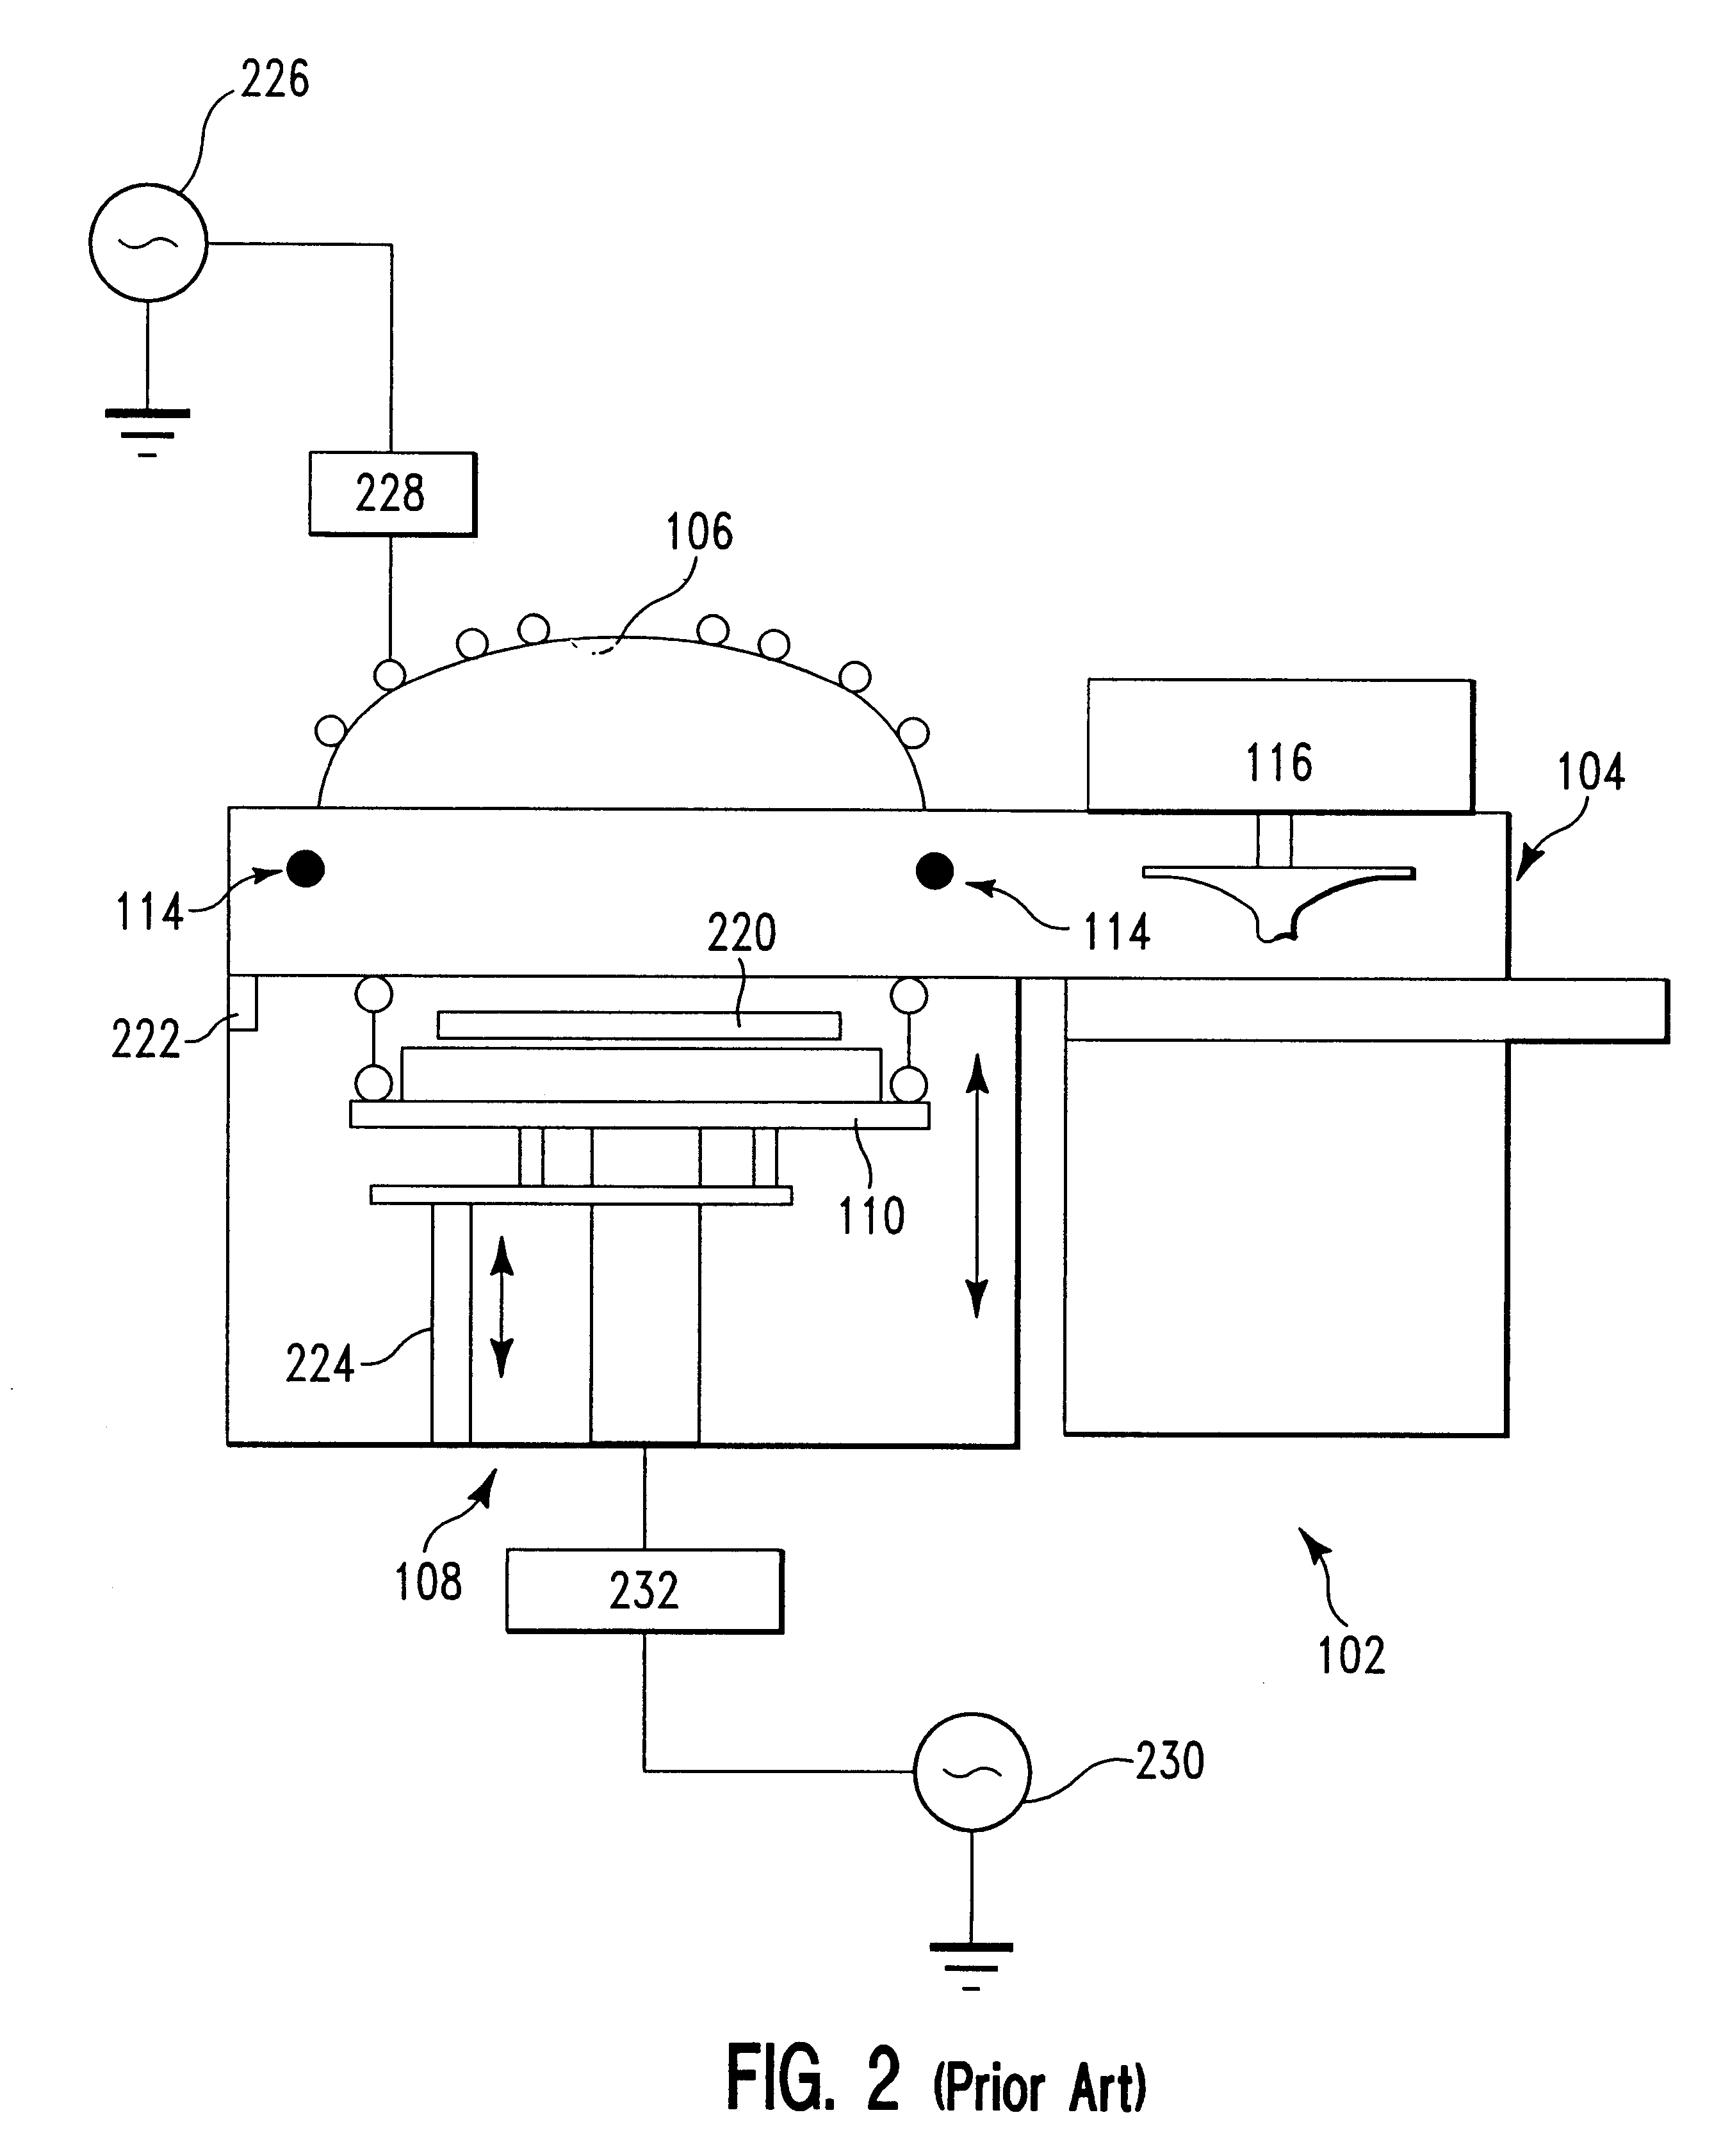 Method for etching a trench having rounded top and bottom corners in a silicon substrate